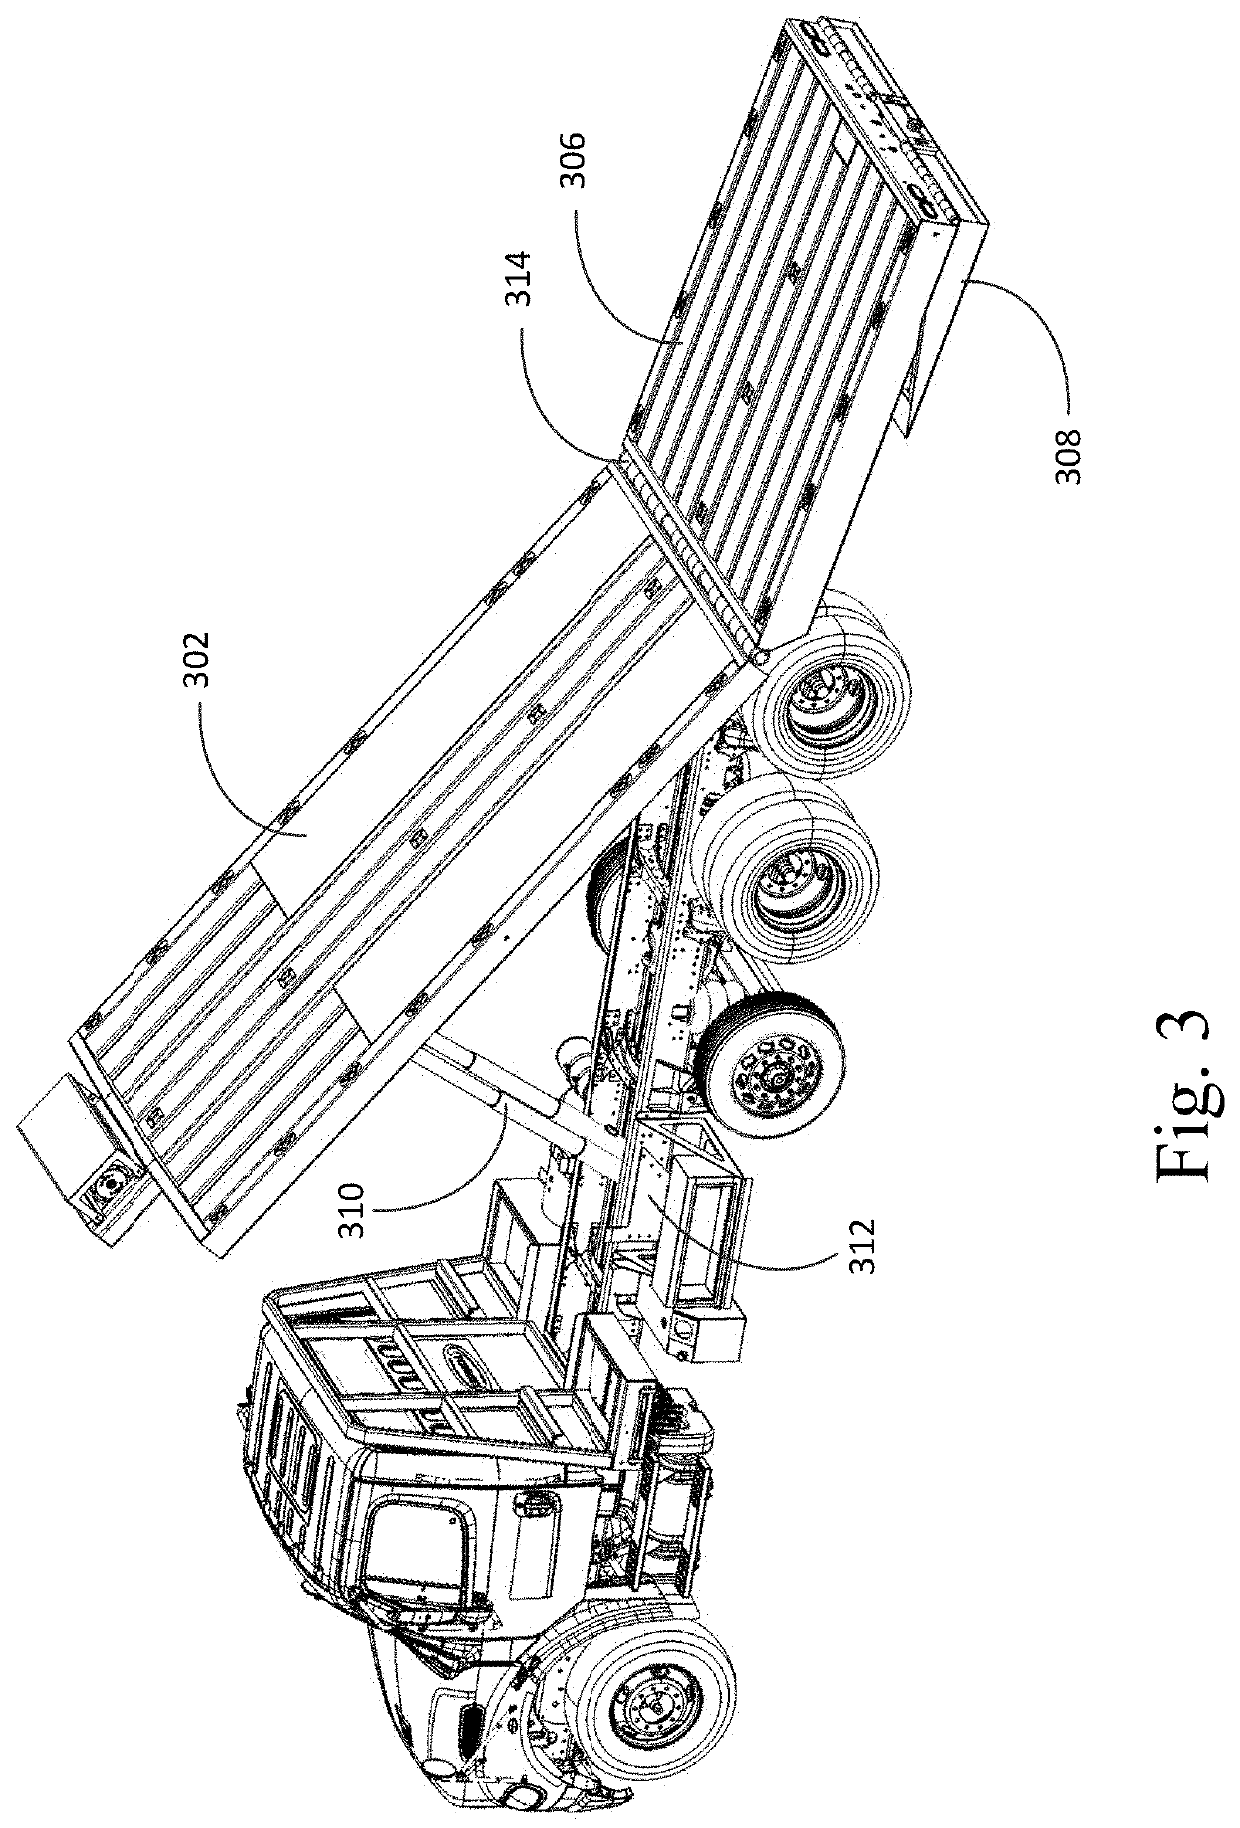 Truck load bed with hydraulic tilt/hydraulic tail that utilizes a unified hinge